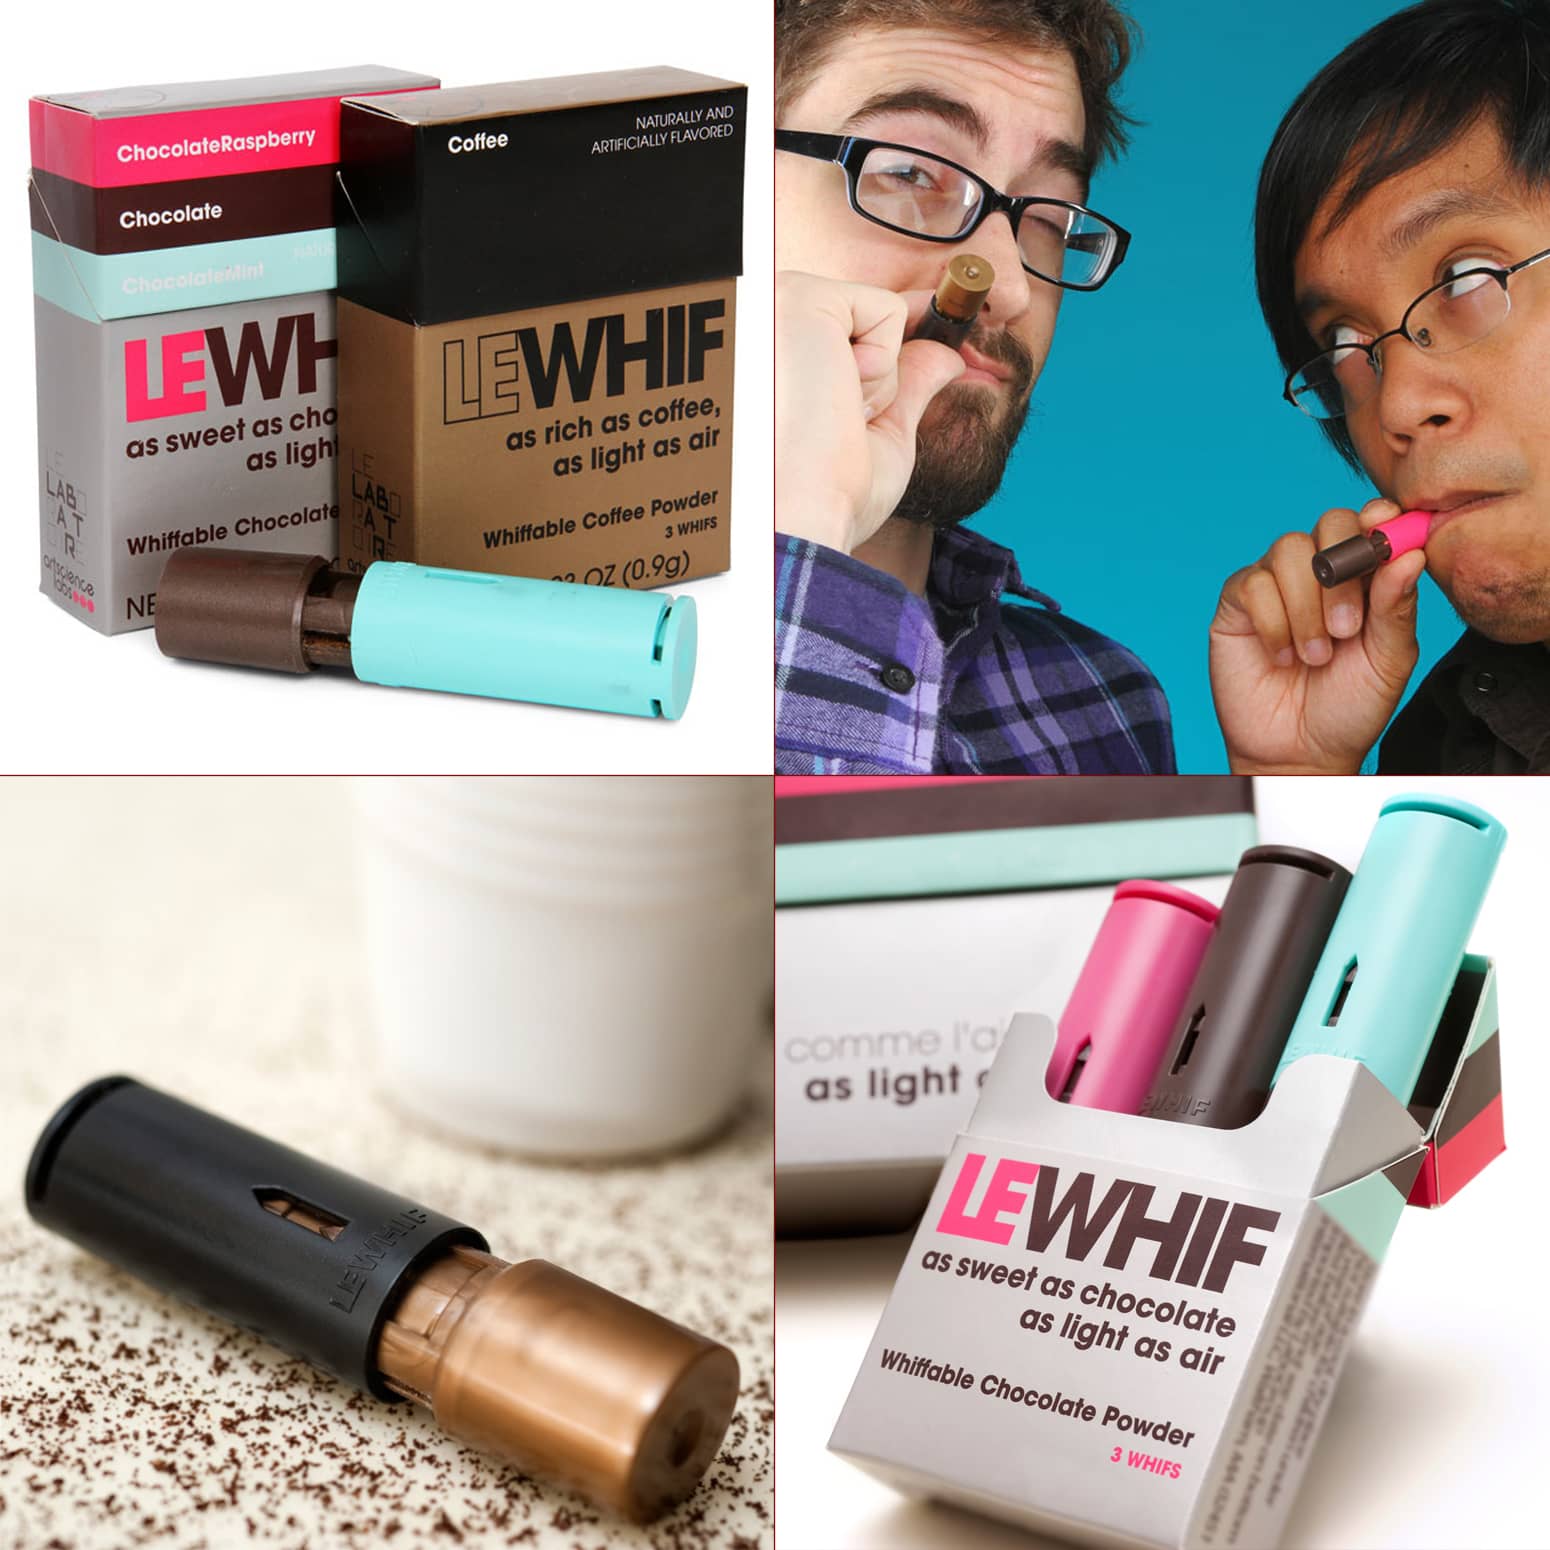 Le Whif - Breathable Chocolate and Coffee